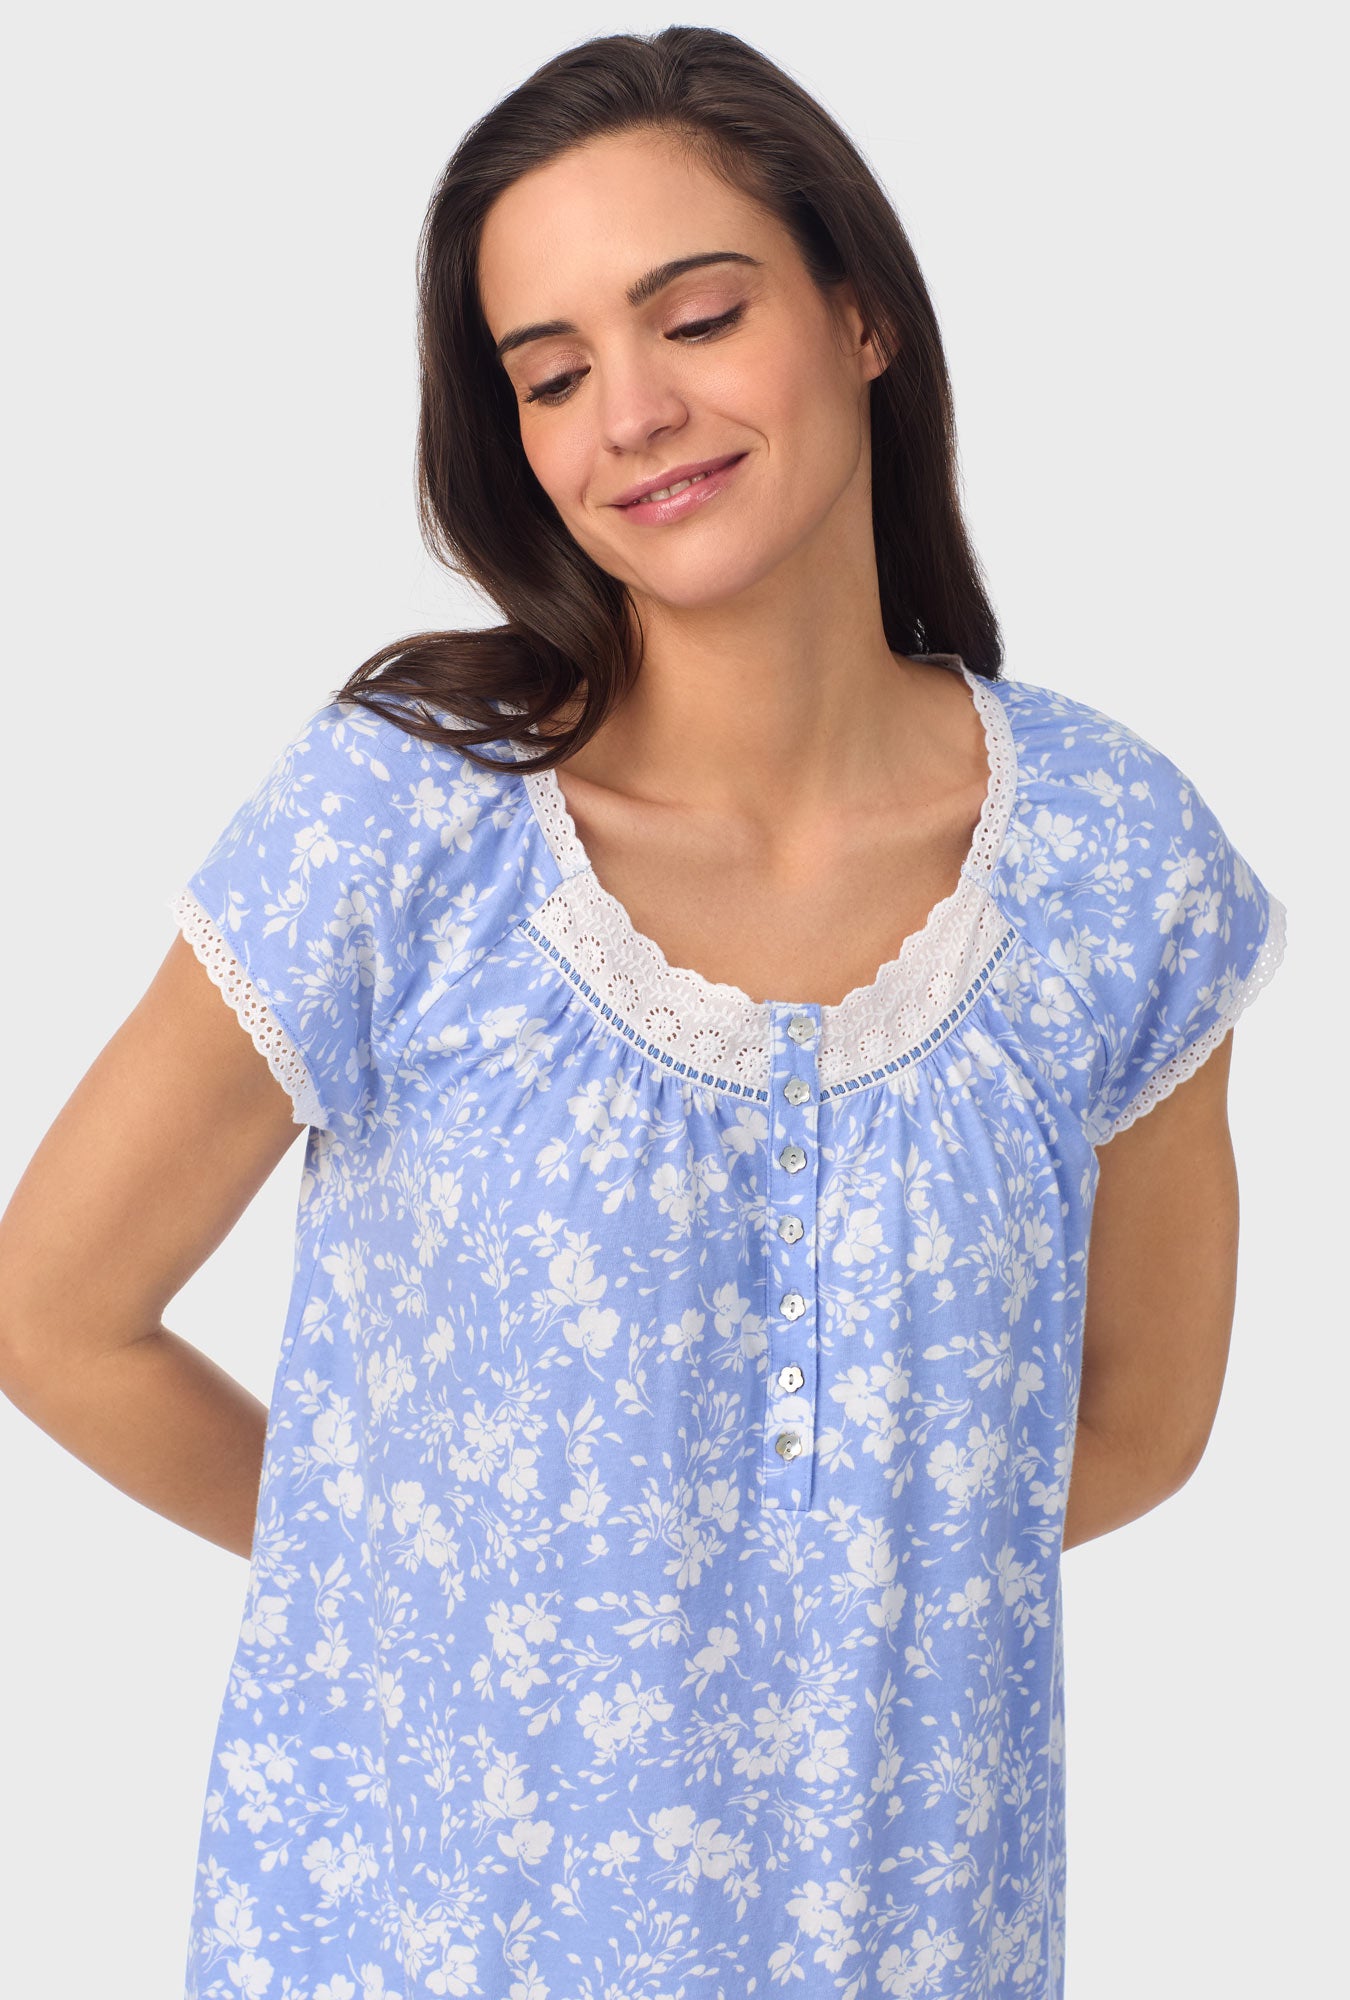 A lady wearing blue short Sleeve Floral Cap Sleeve Nightshirt  with Powder Blue print